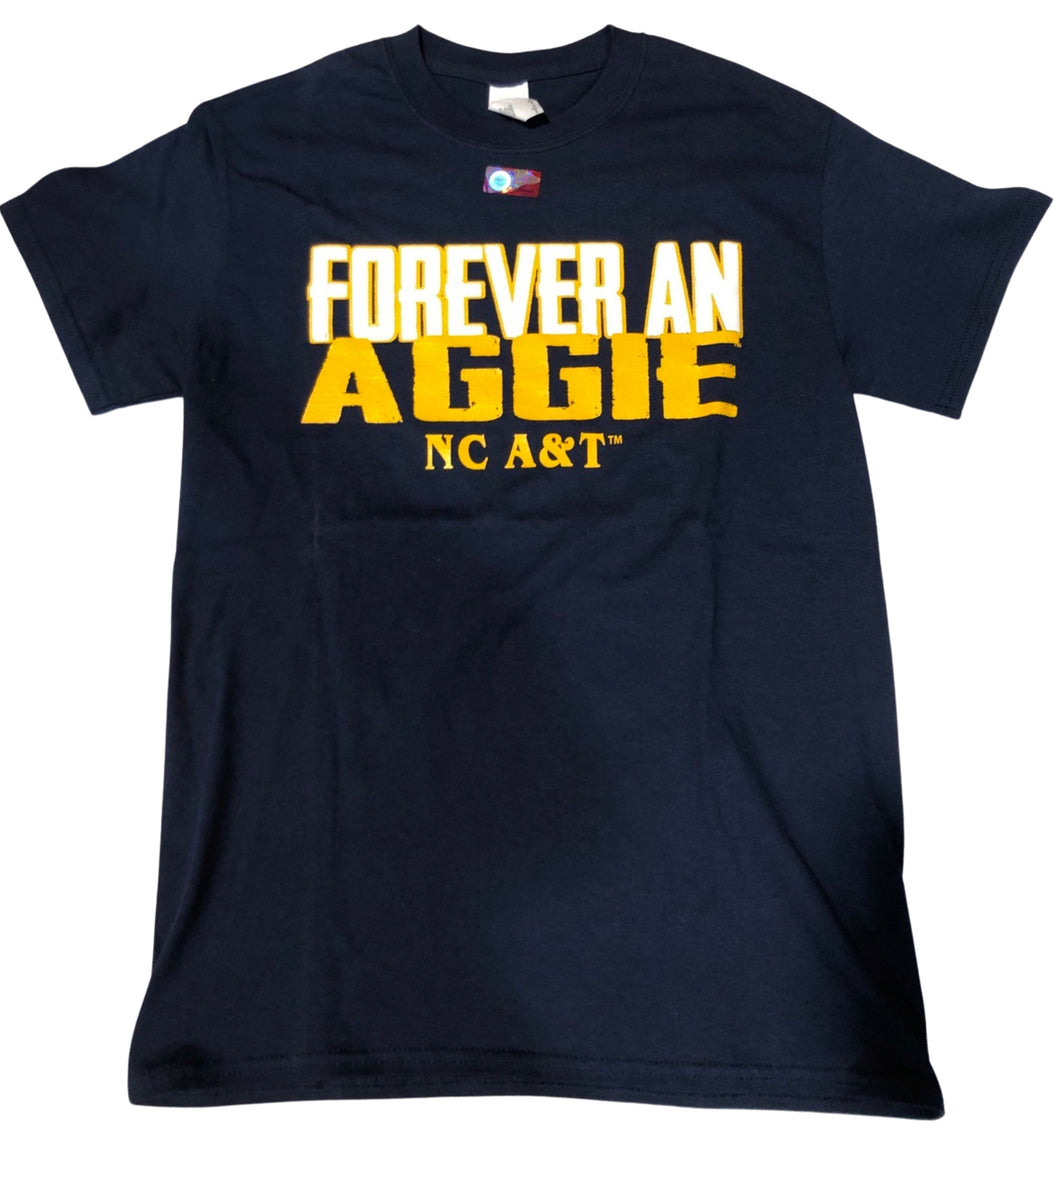 NC A&T Forever an Aggie